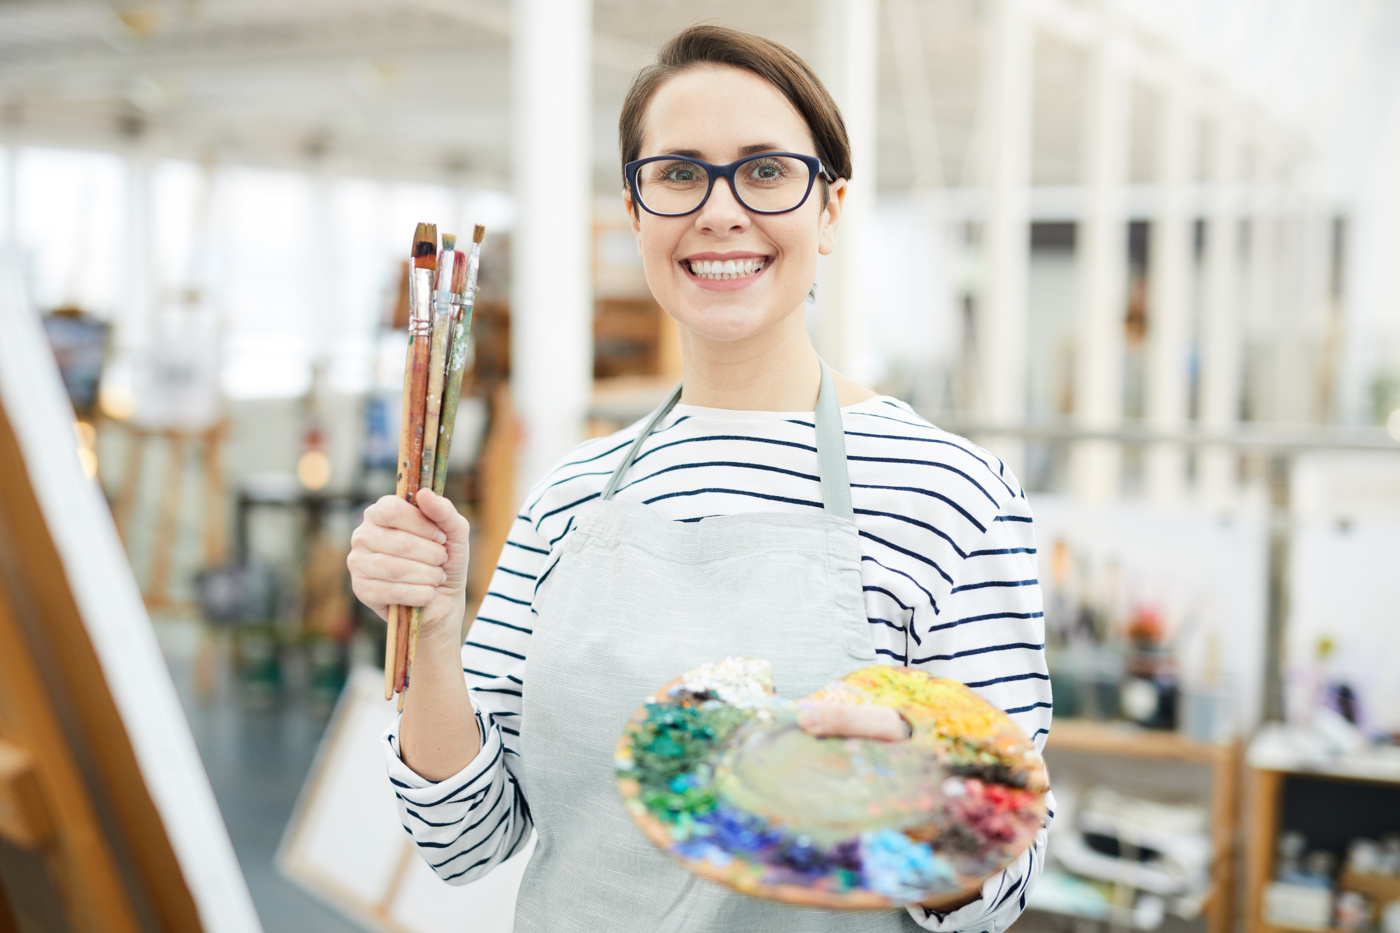 An art therapist holds a paintbrush and palette and smiles at the camera.